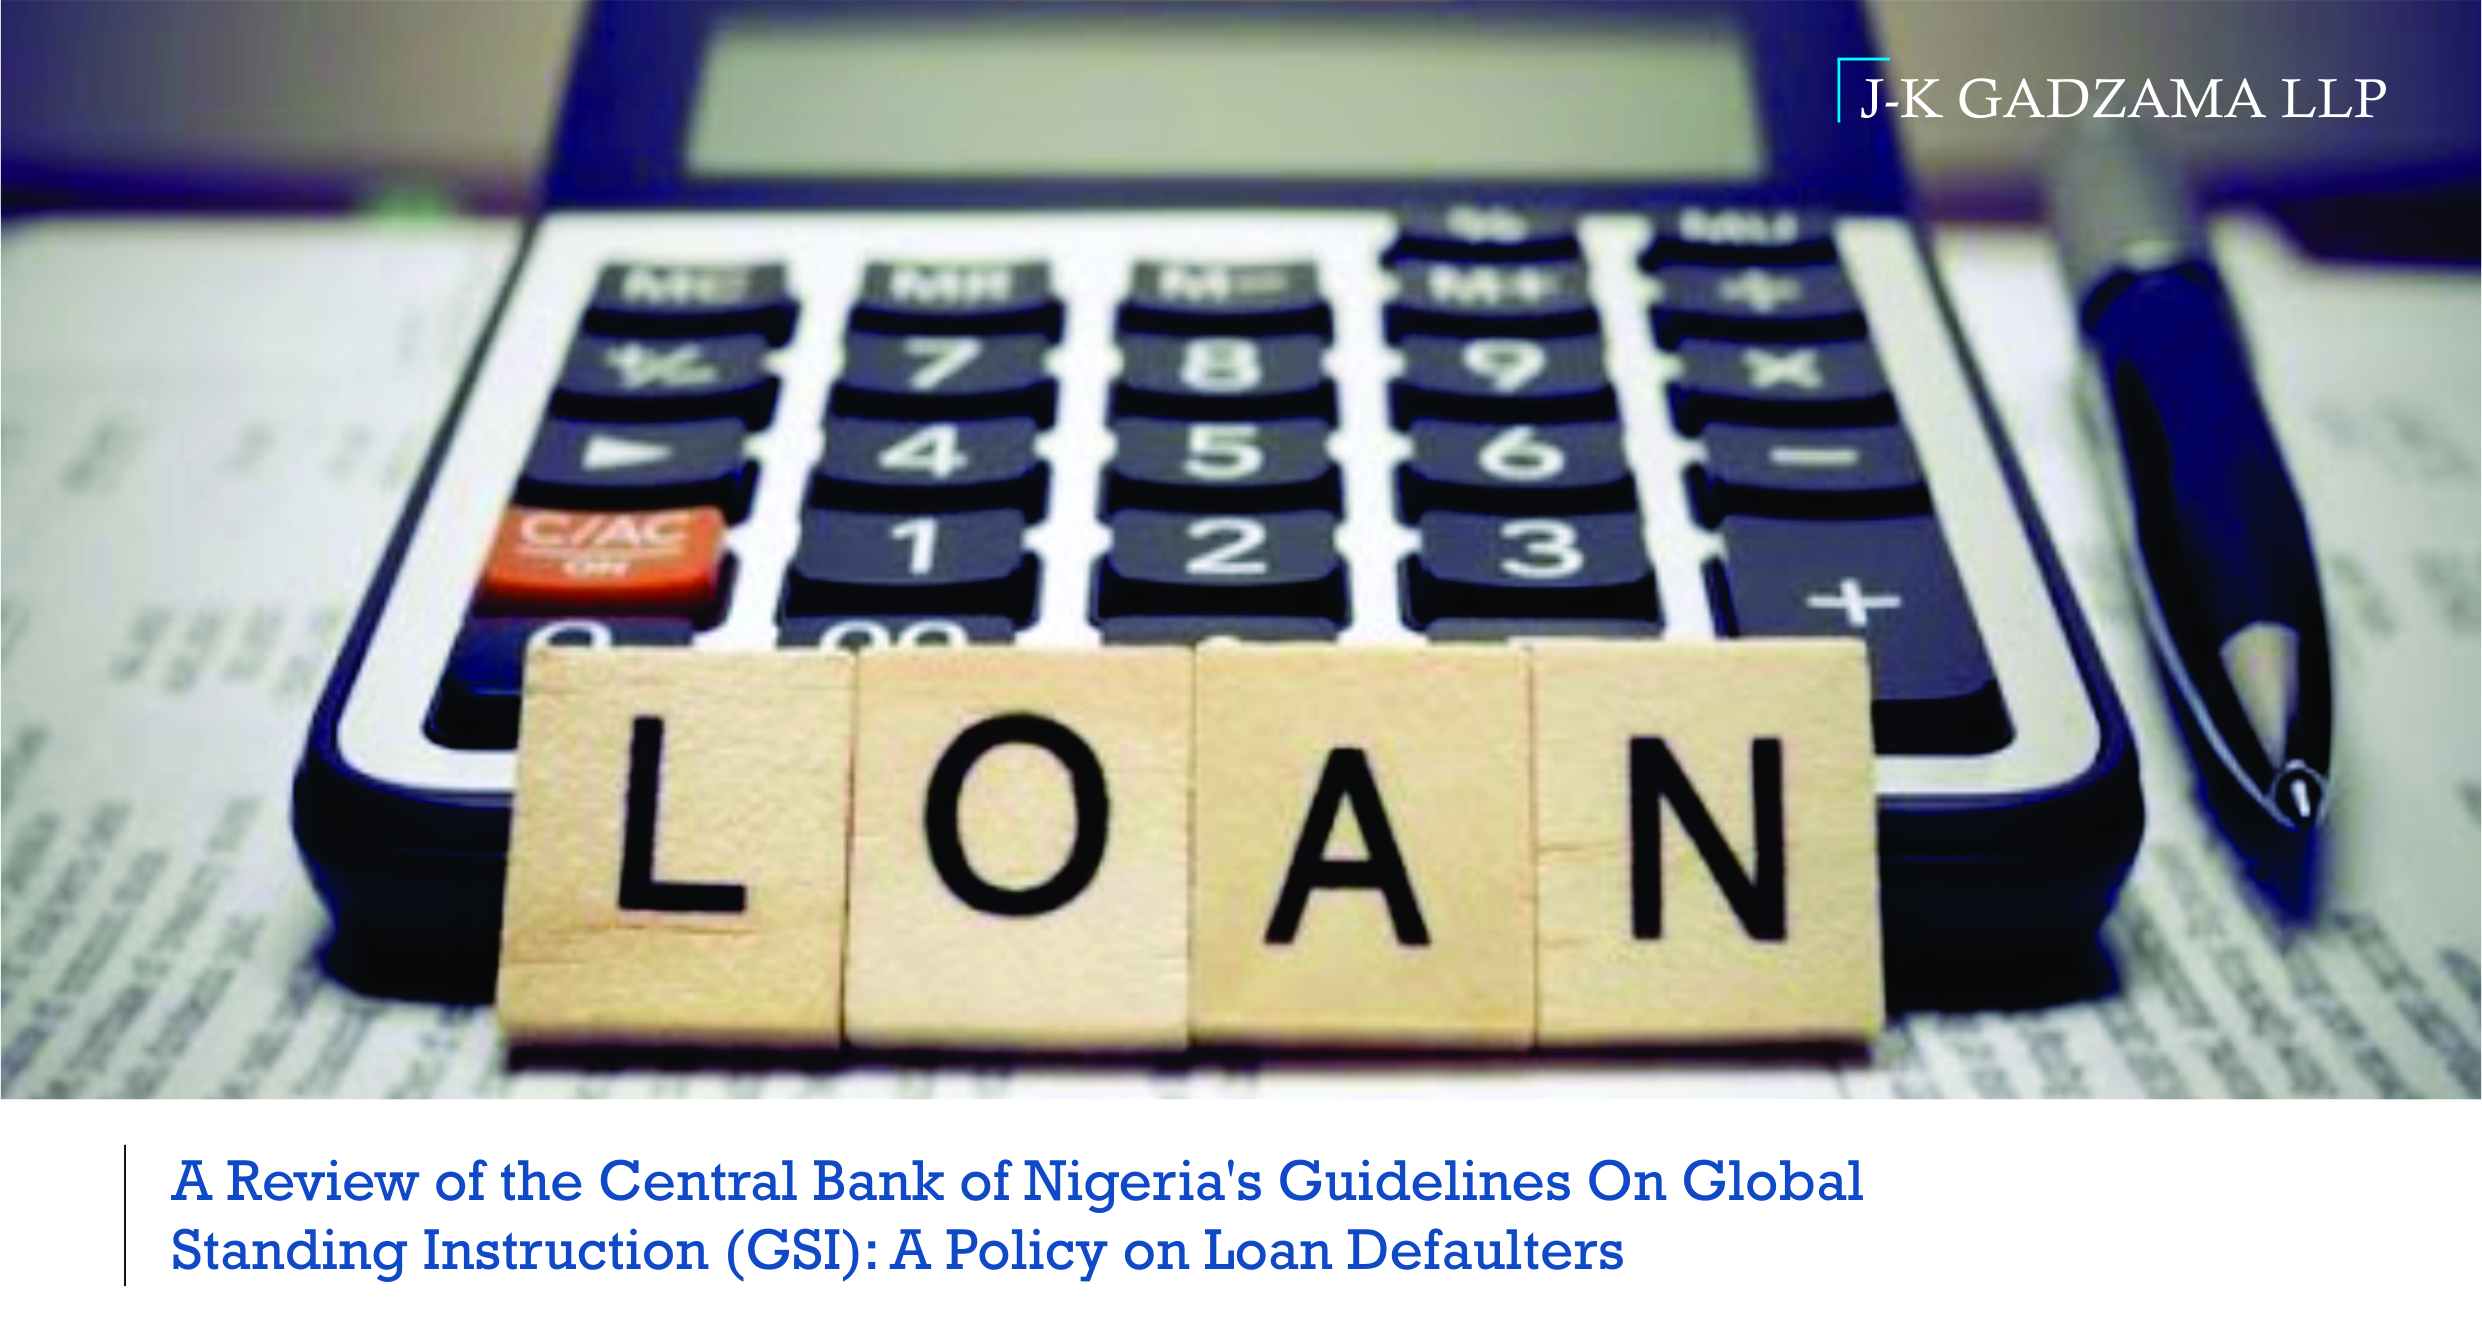 A Review of the Central Bank of Nigeria's Guidelines on Global Standings Instructions (GSI)